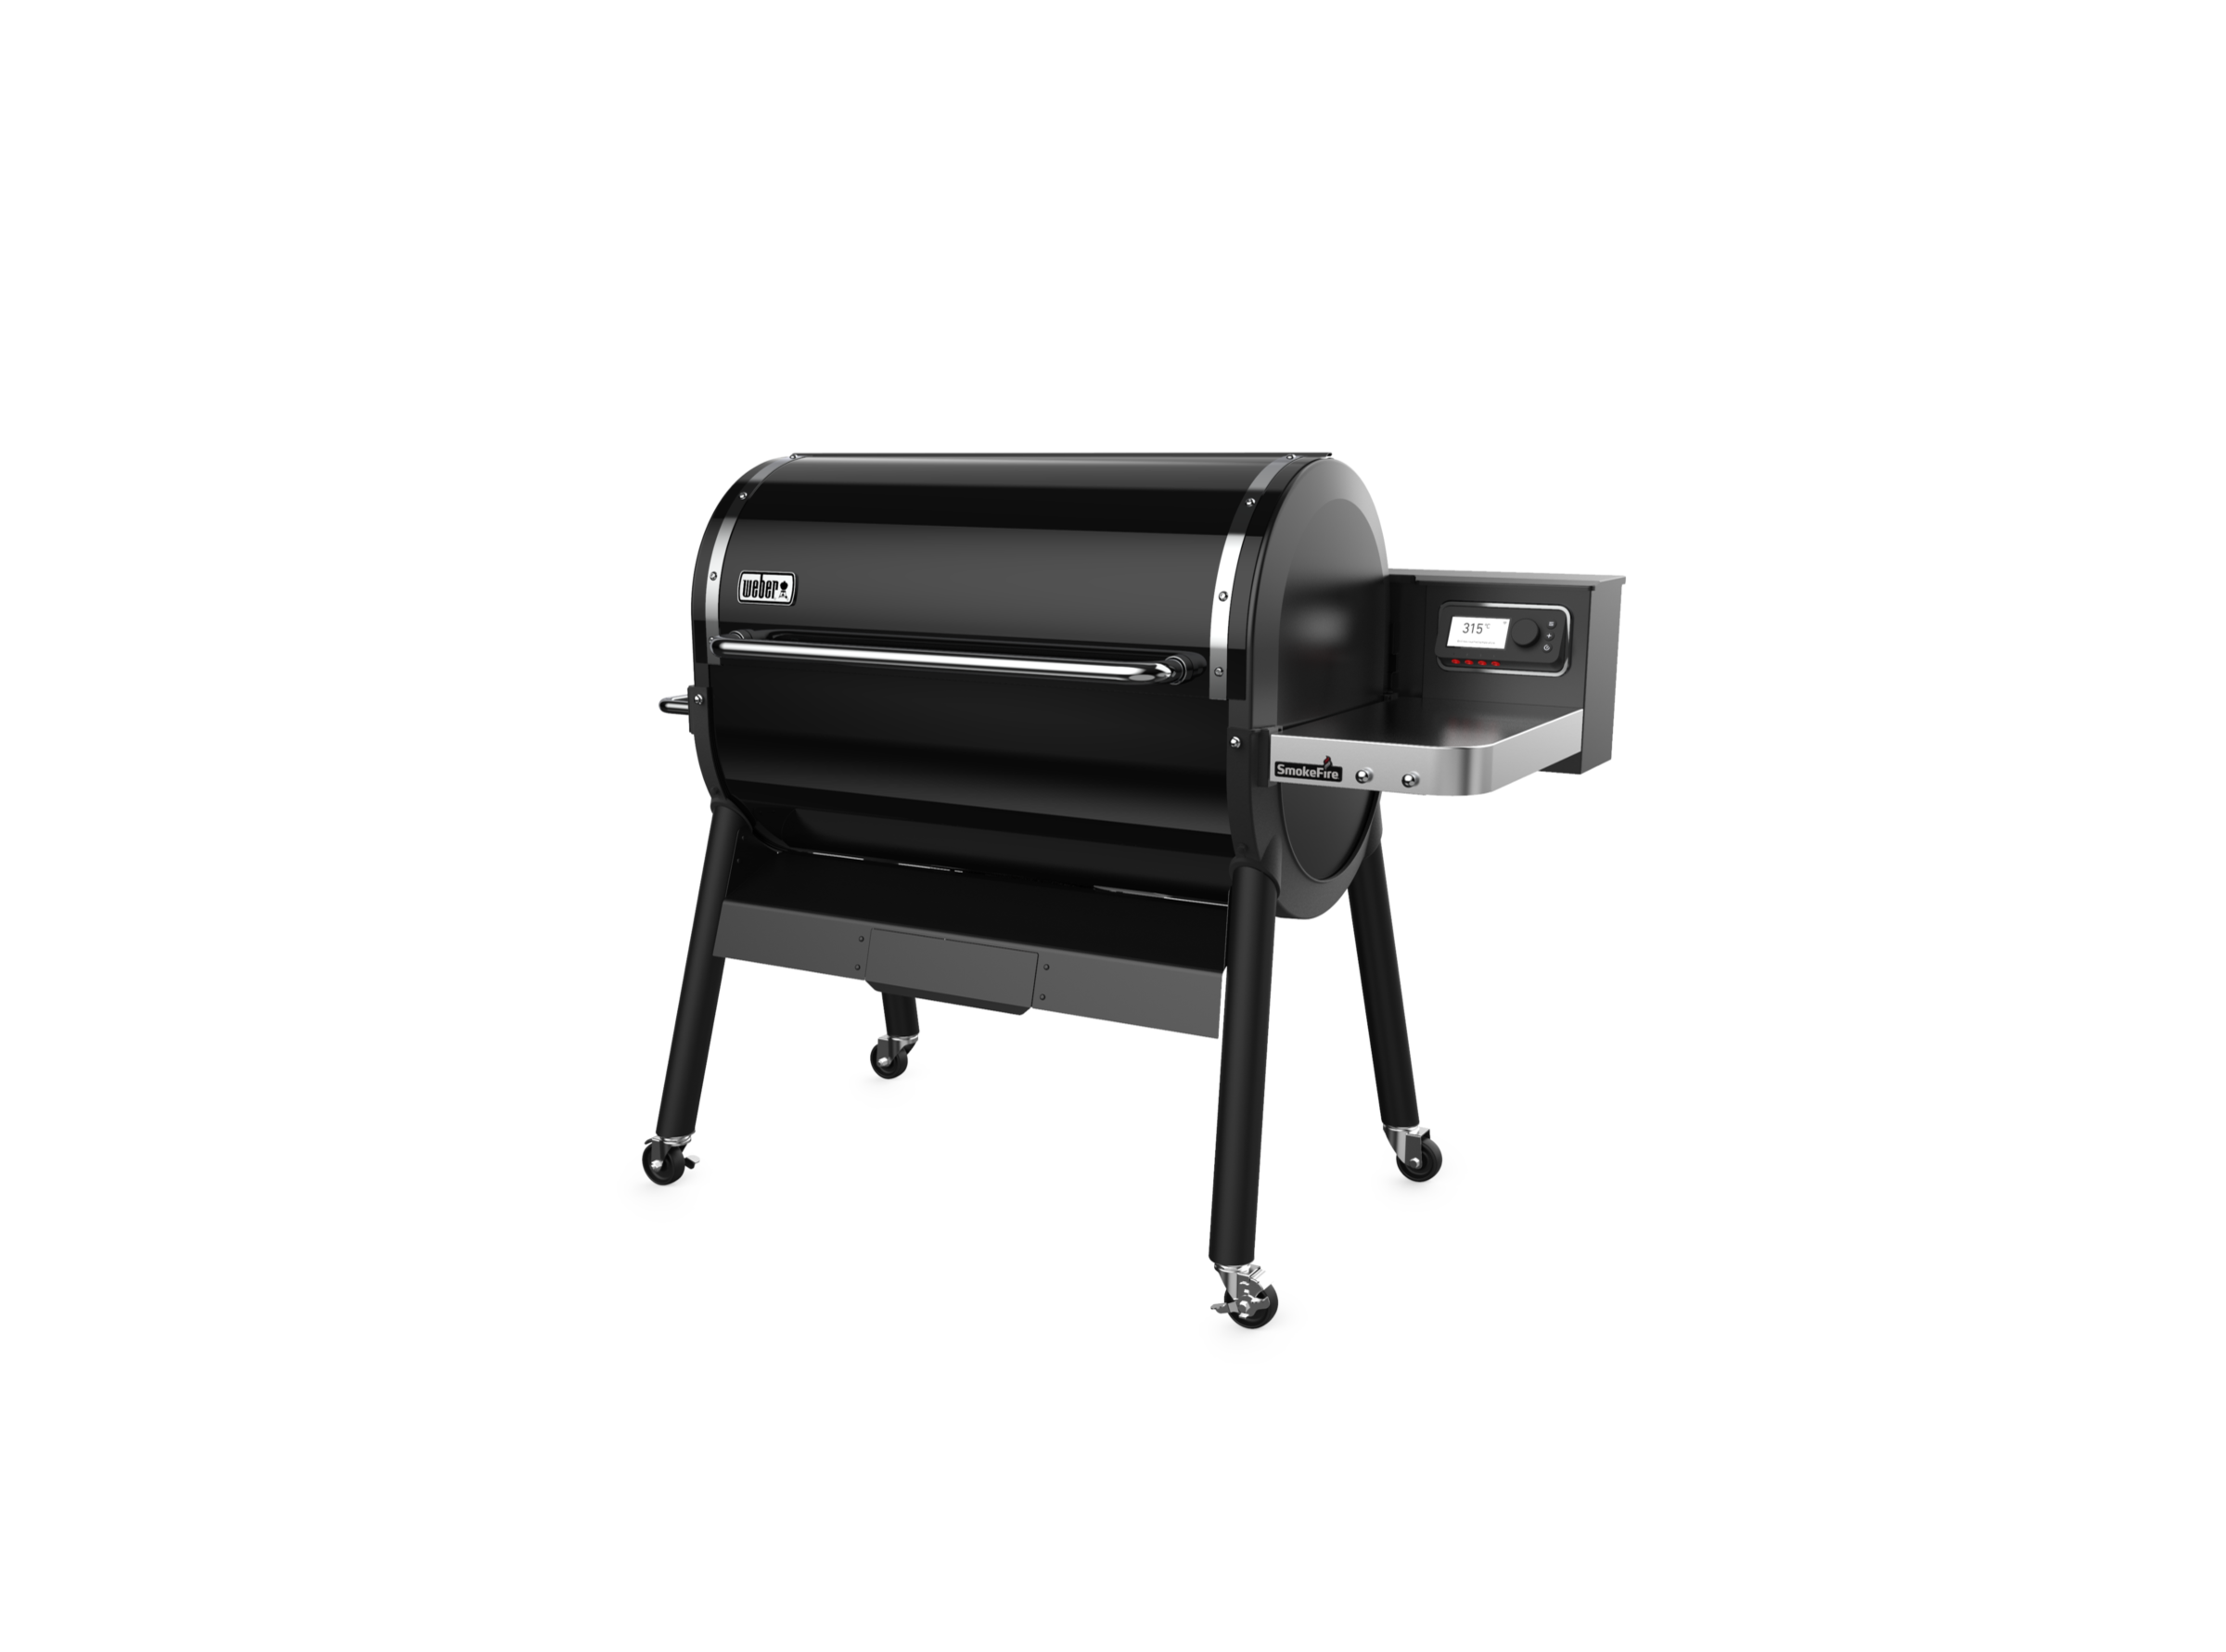 Weber Smoefire Ex6 Wood Fired Grill 23511004 3